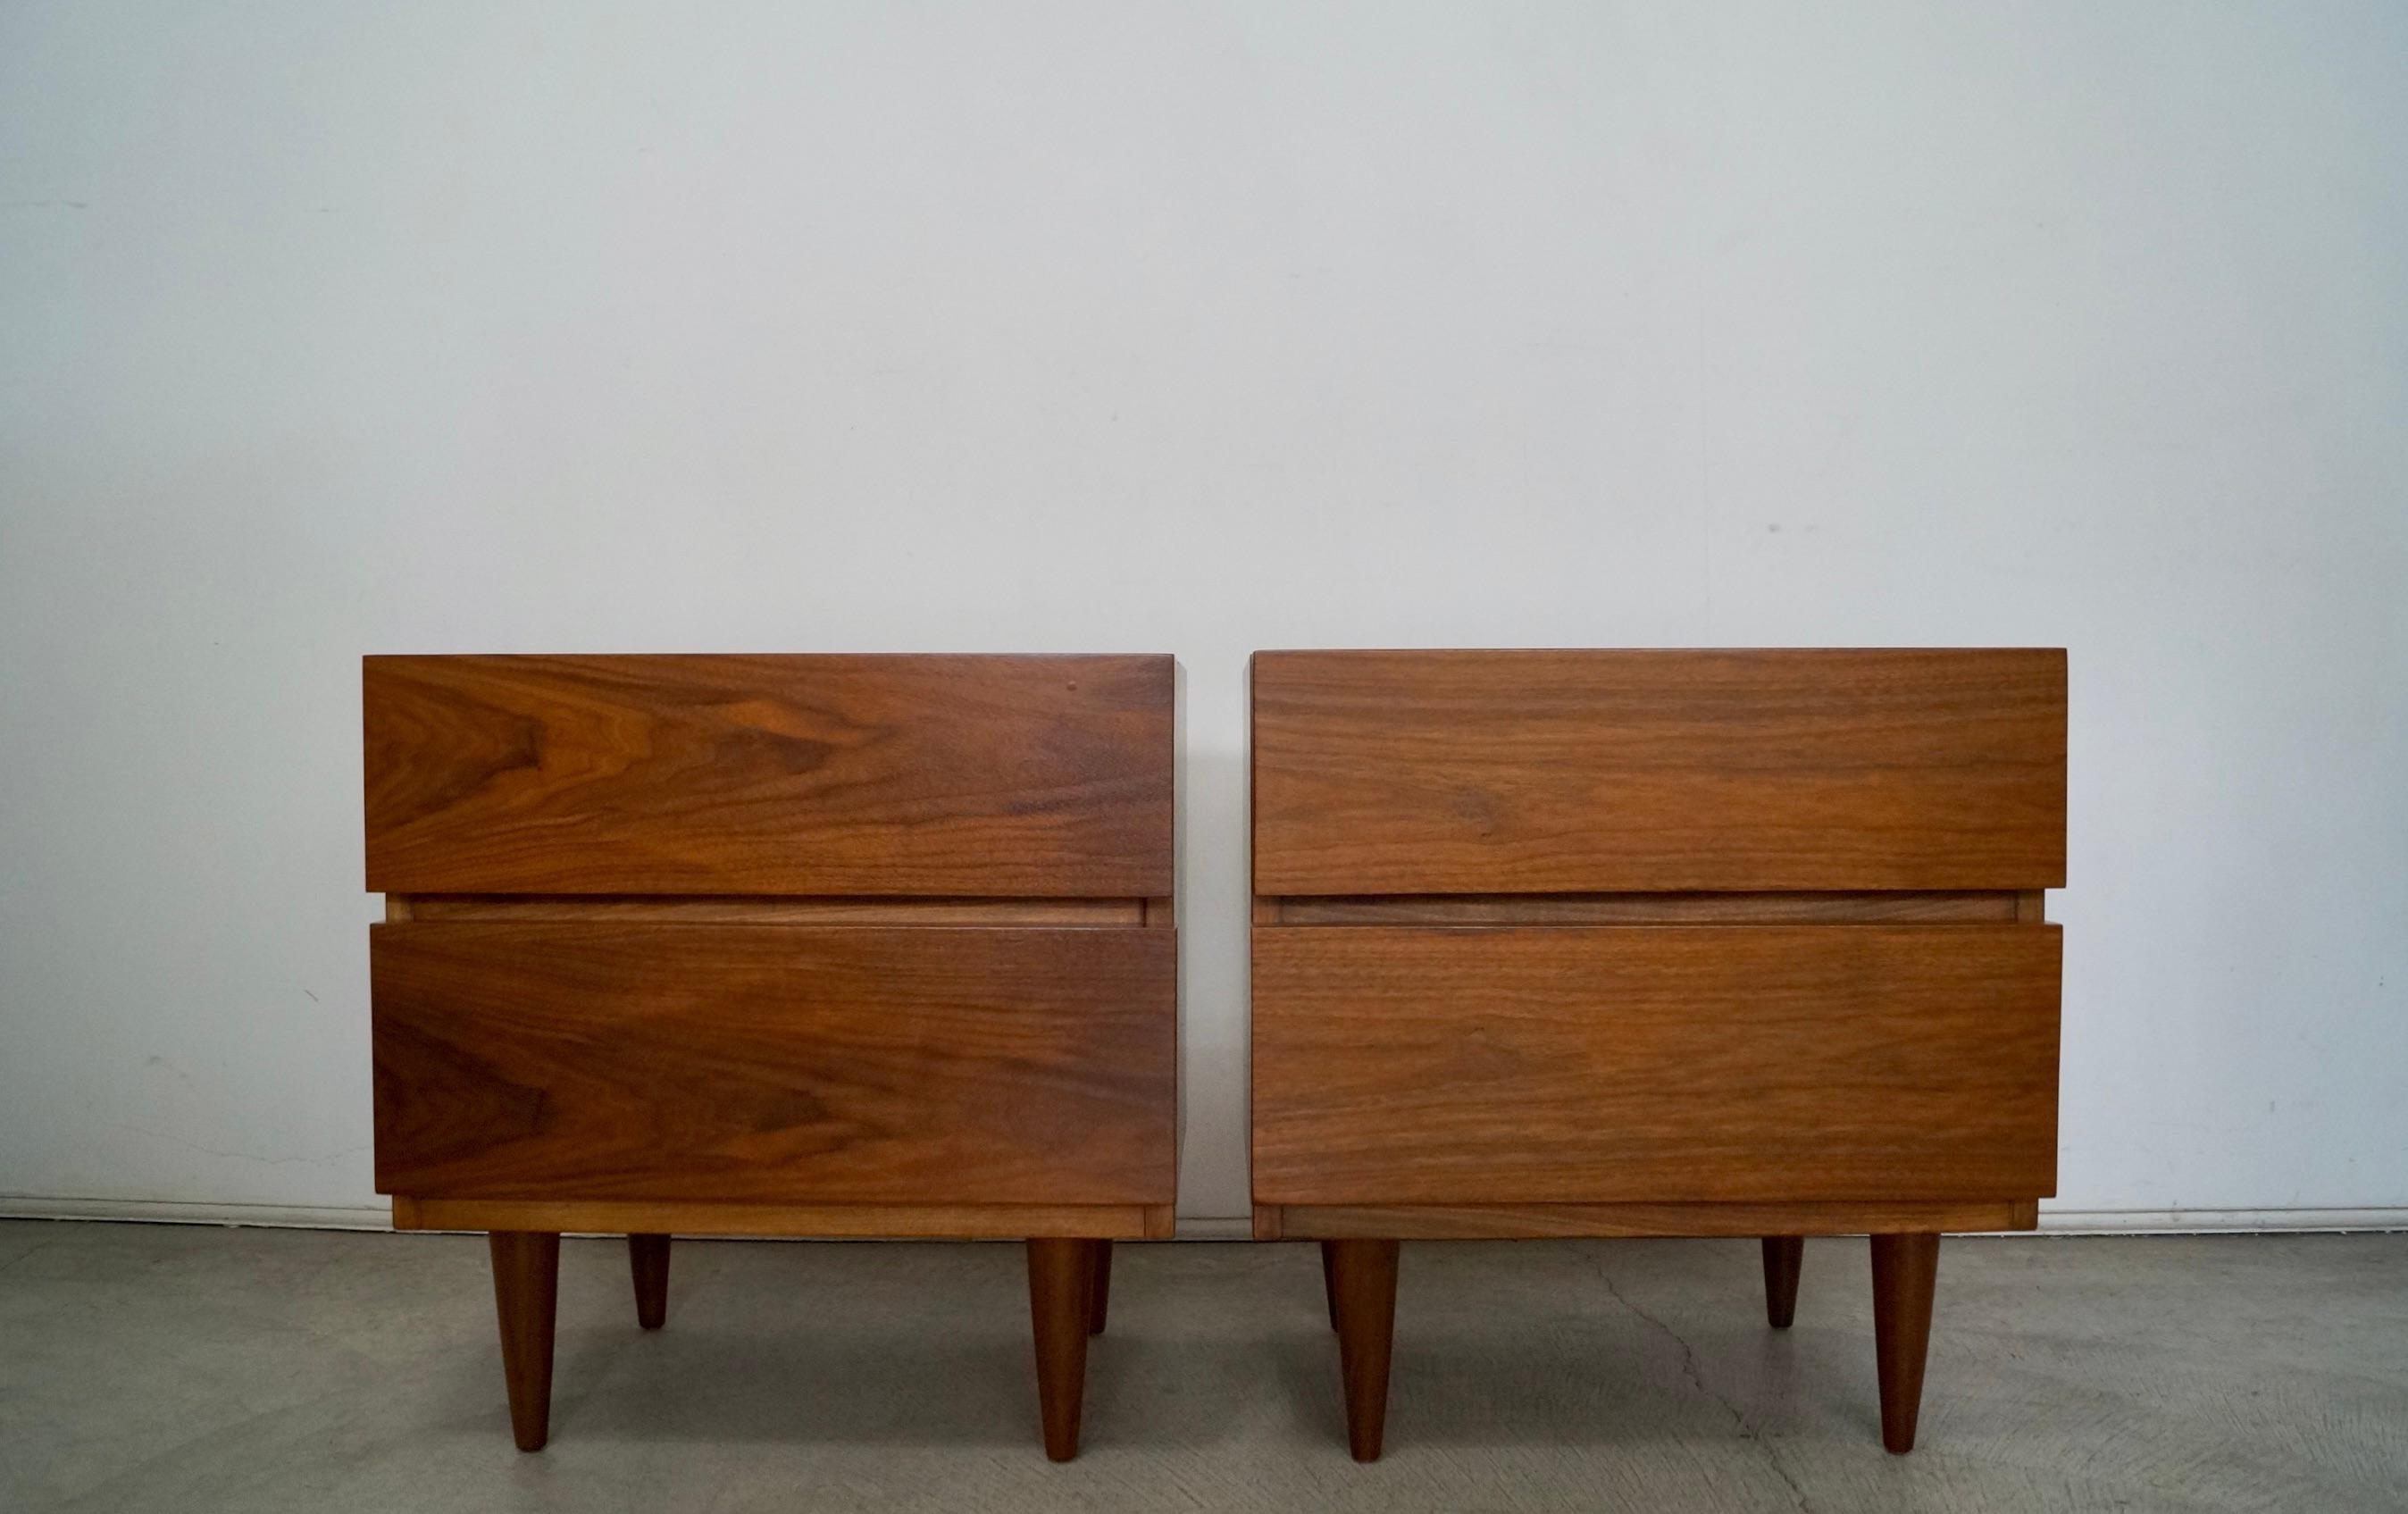 Vintage 1960s Mid-Century Modern pair of night stands for sale. Manufactured by American of Martinsville, and have been professionally refinished. They are really well made, and have a clean design. The walnut grain on these is very beautiful. We